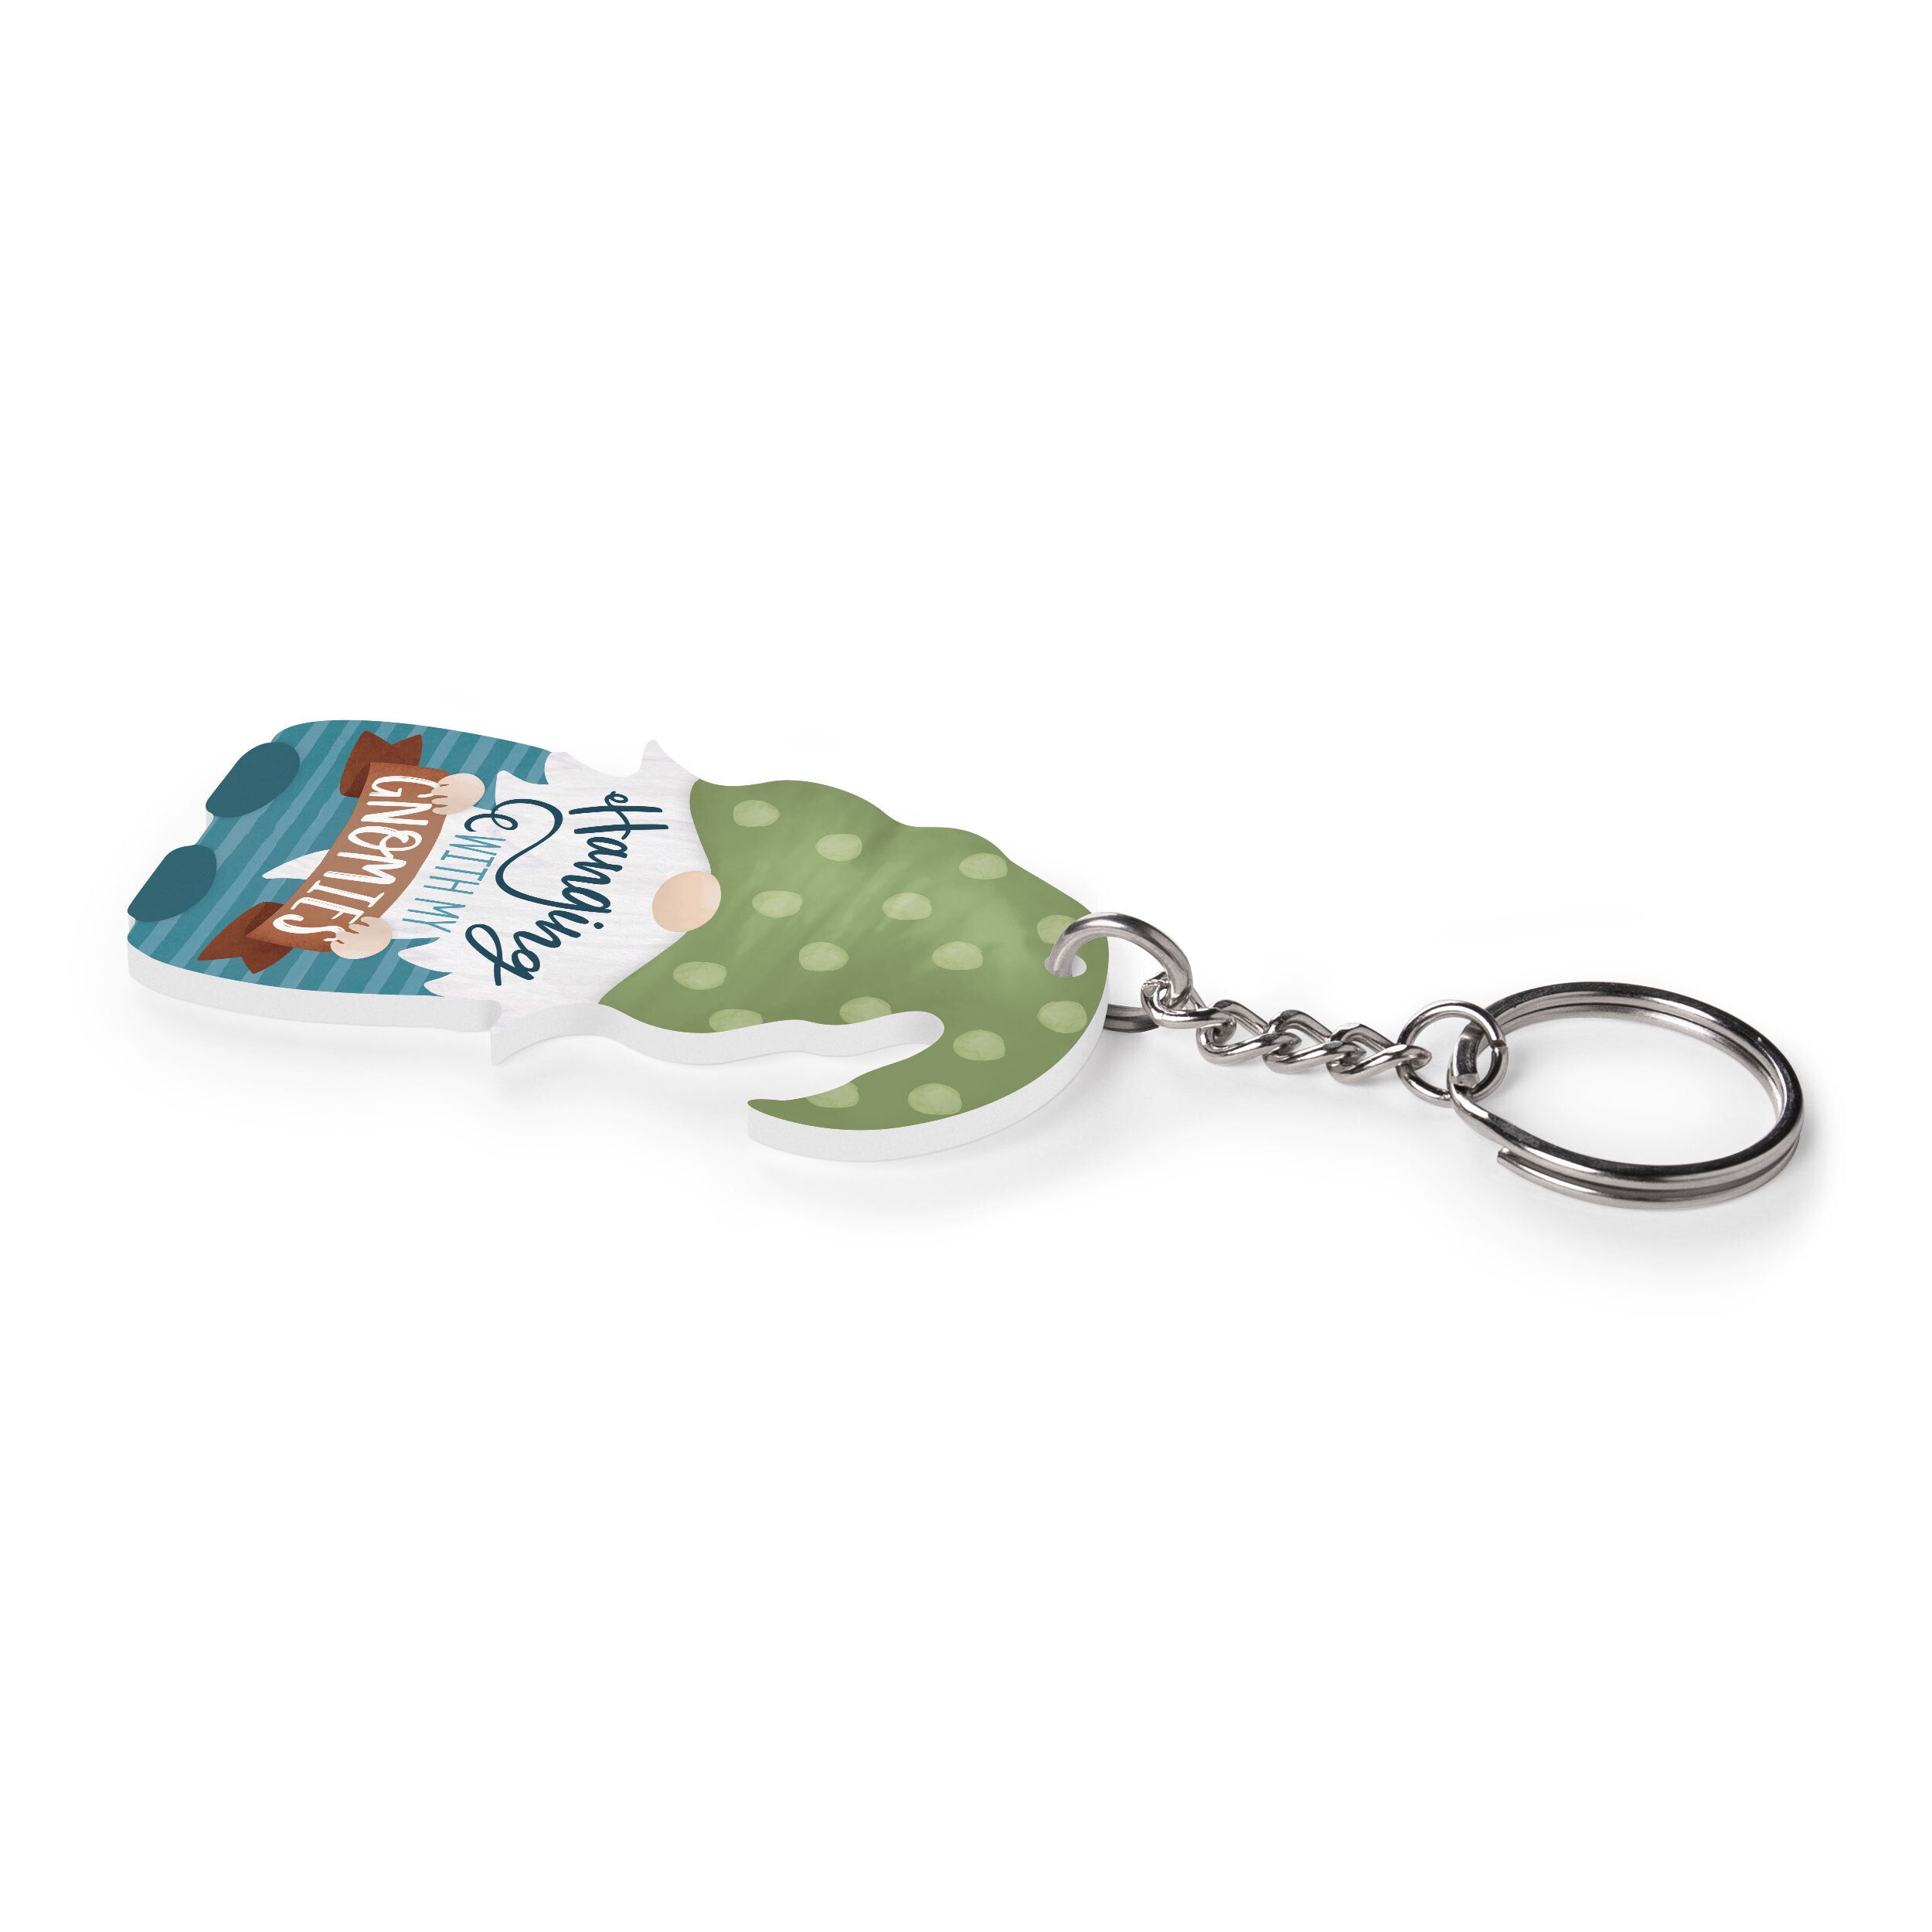 **Hanging With My Gnomies Acrylic Gnome Shape Key Chain